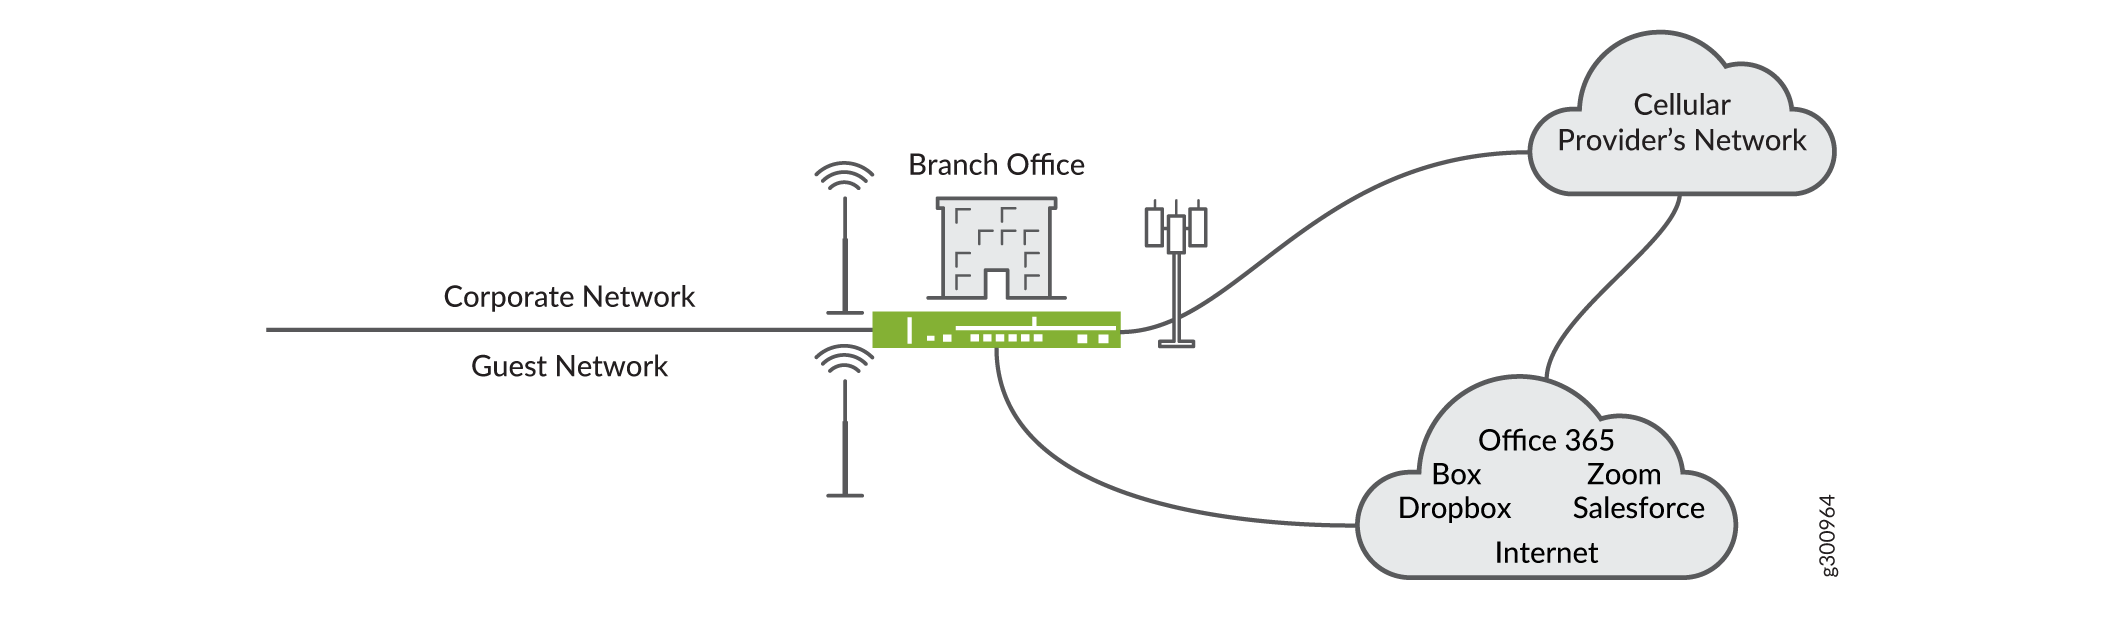 Branch Office with Redundant Internet Connectivity